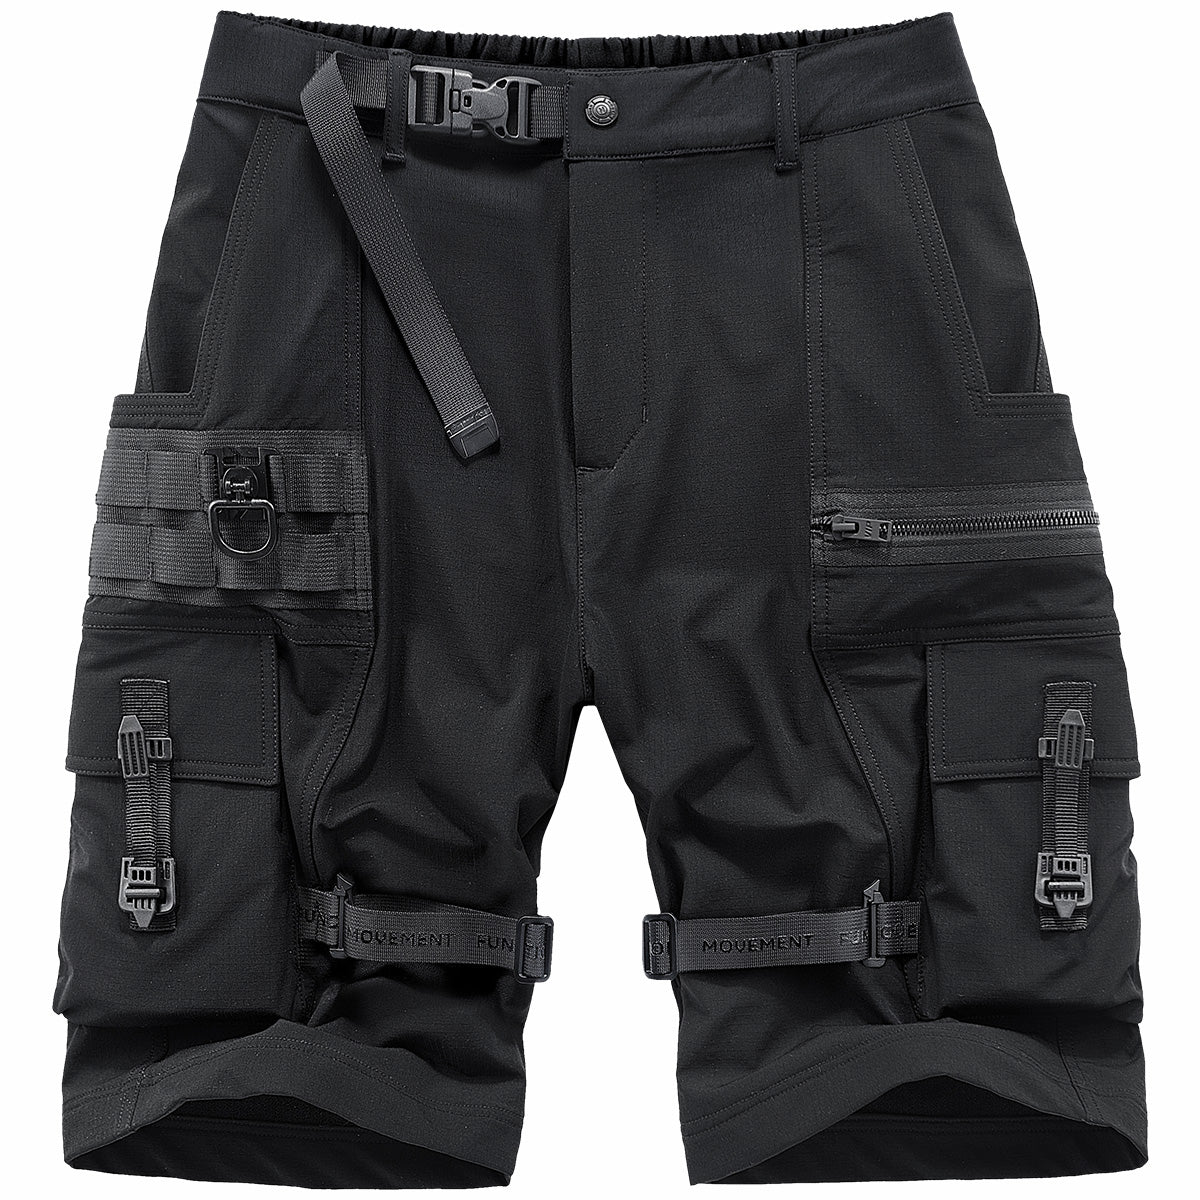 Functional Style Work Shorts For Men